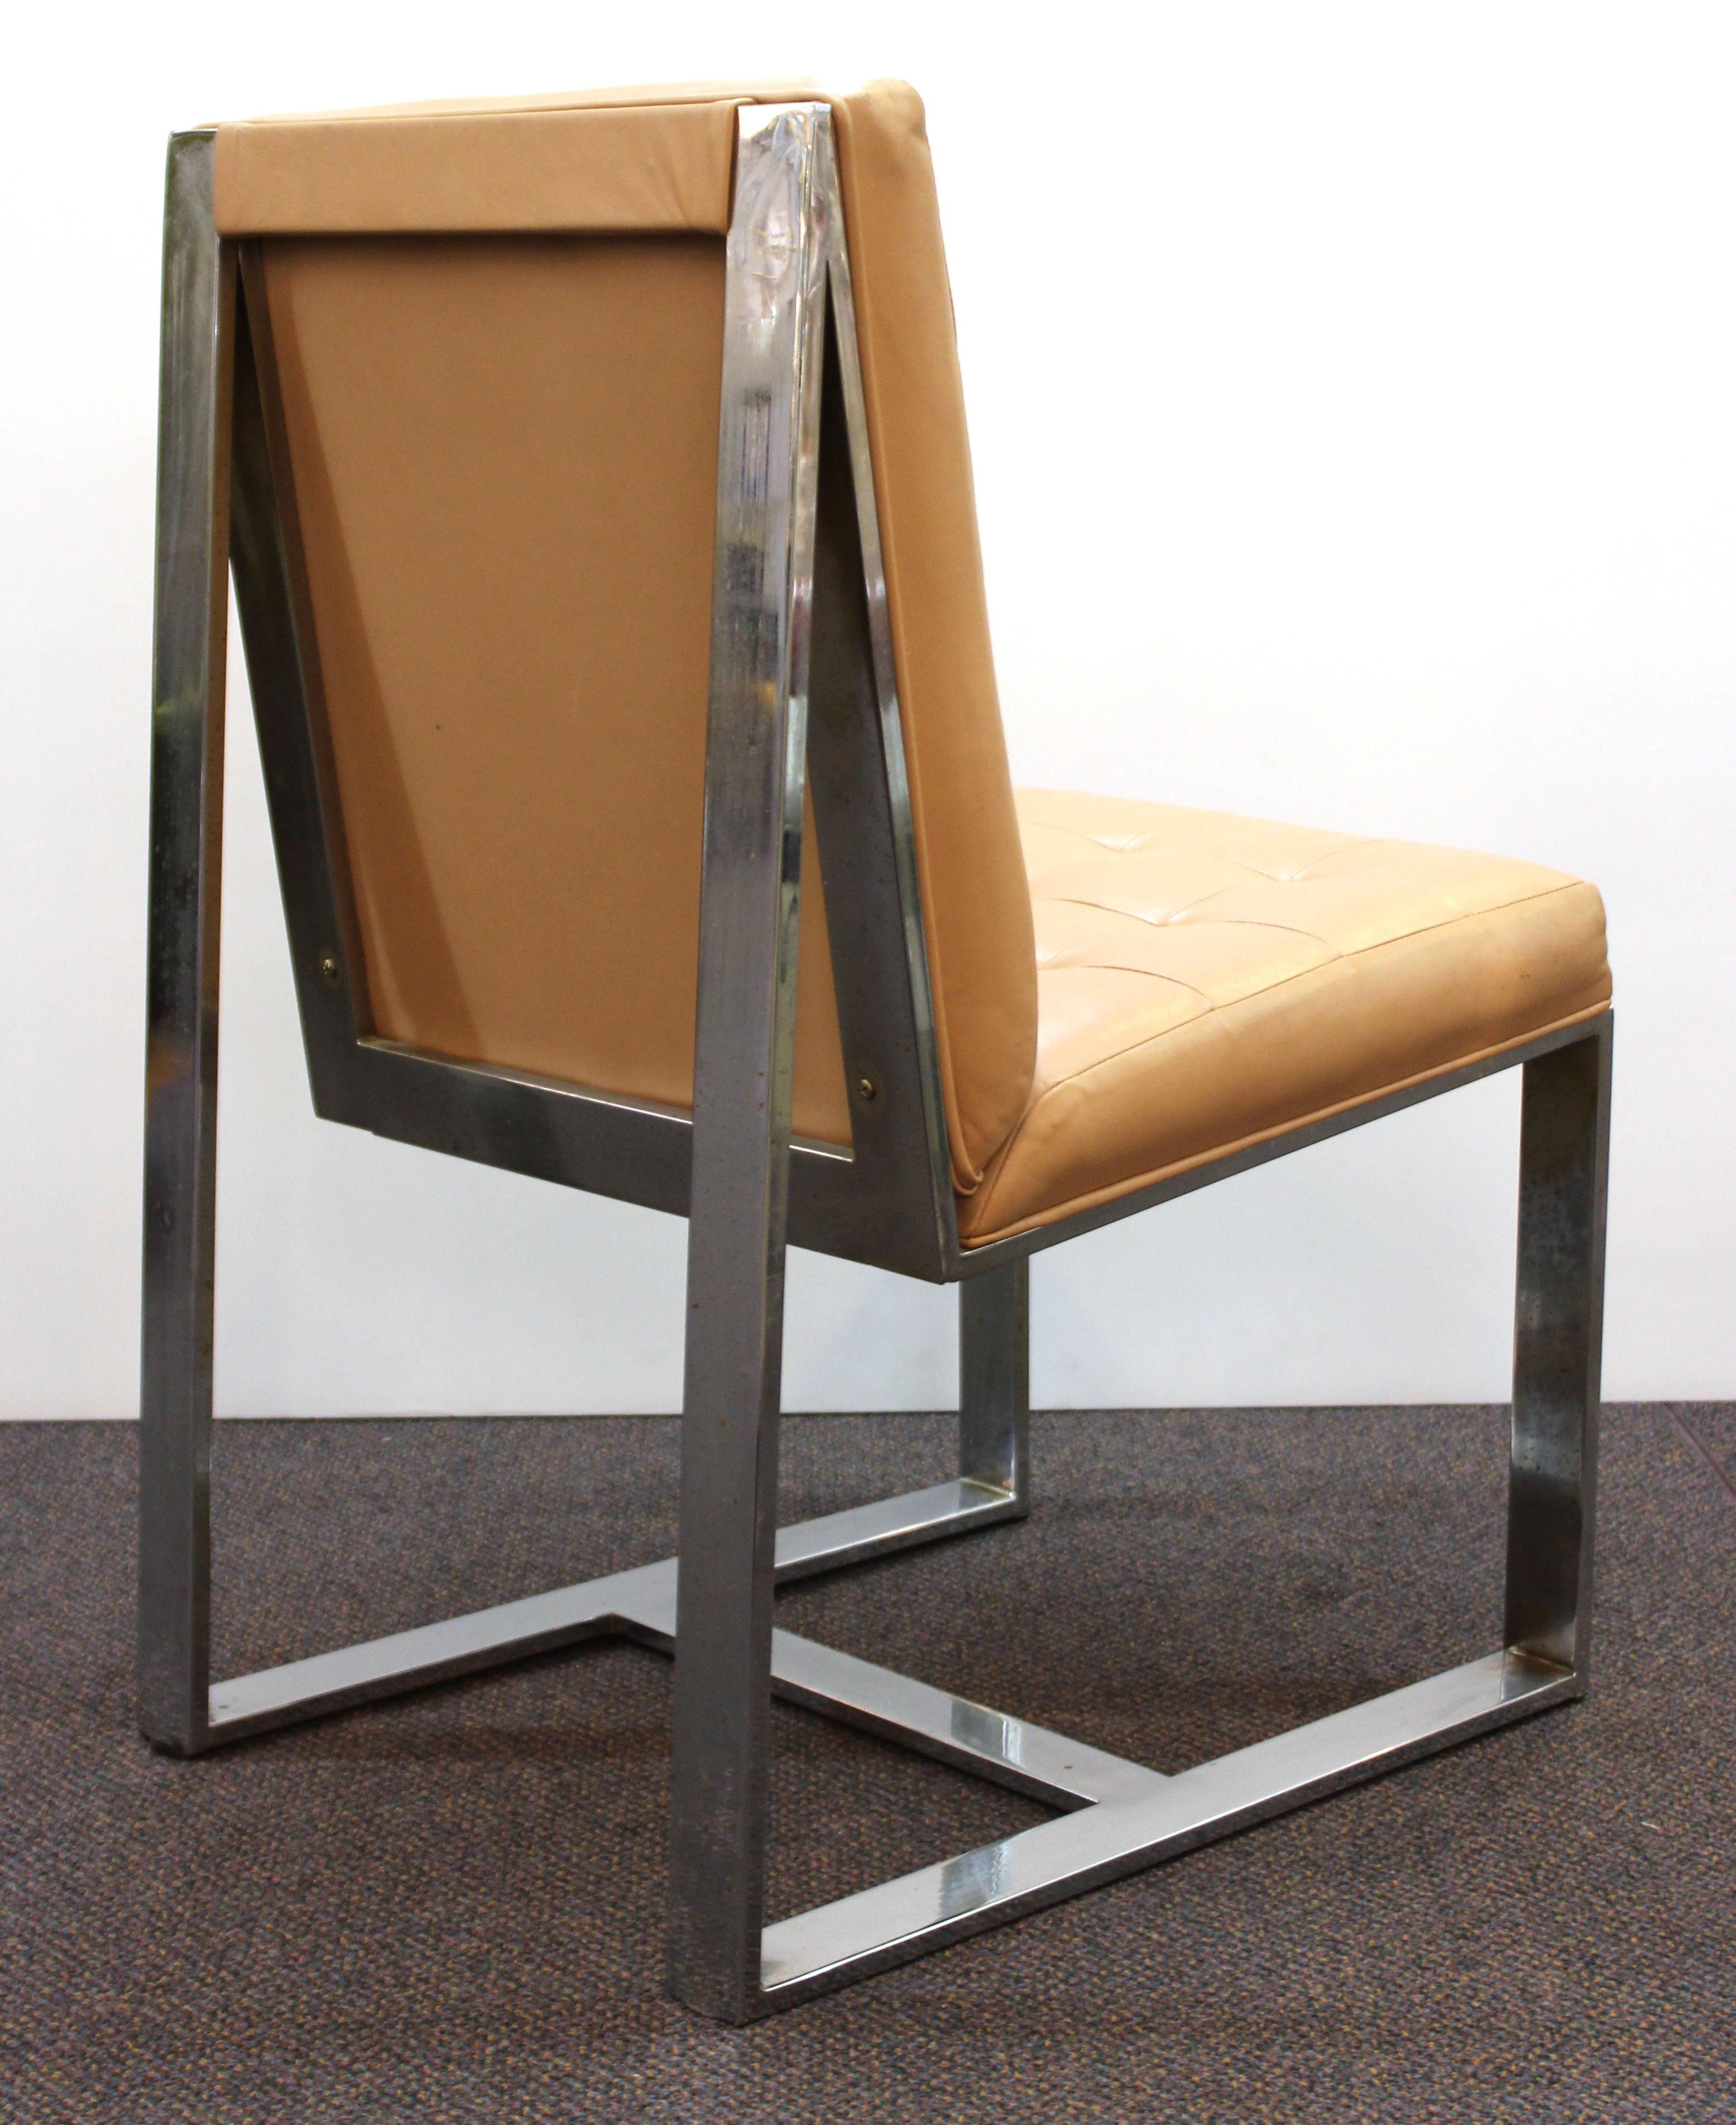 Late 20th Century Milo Baughman Mid-Century Modern Cantilevered Chrome Dining Chairs